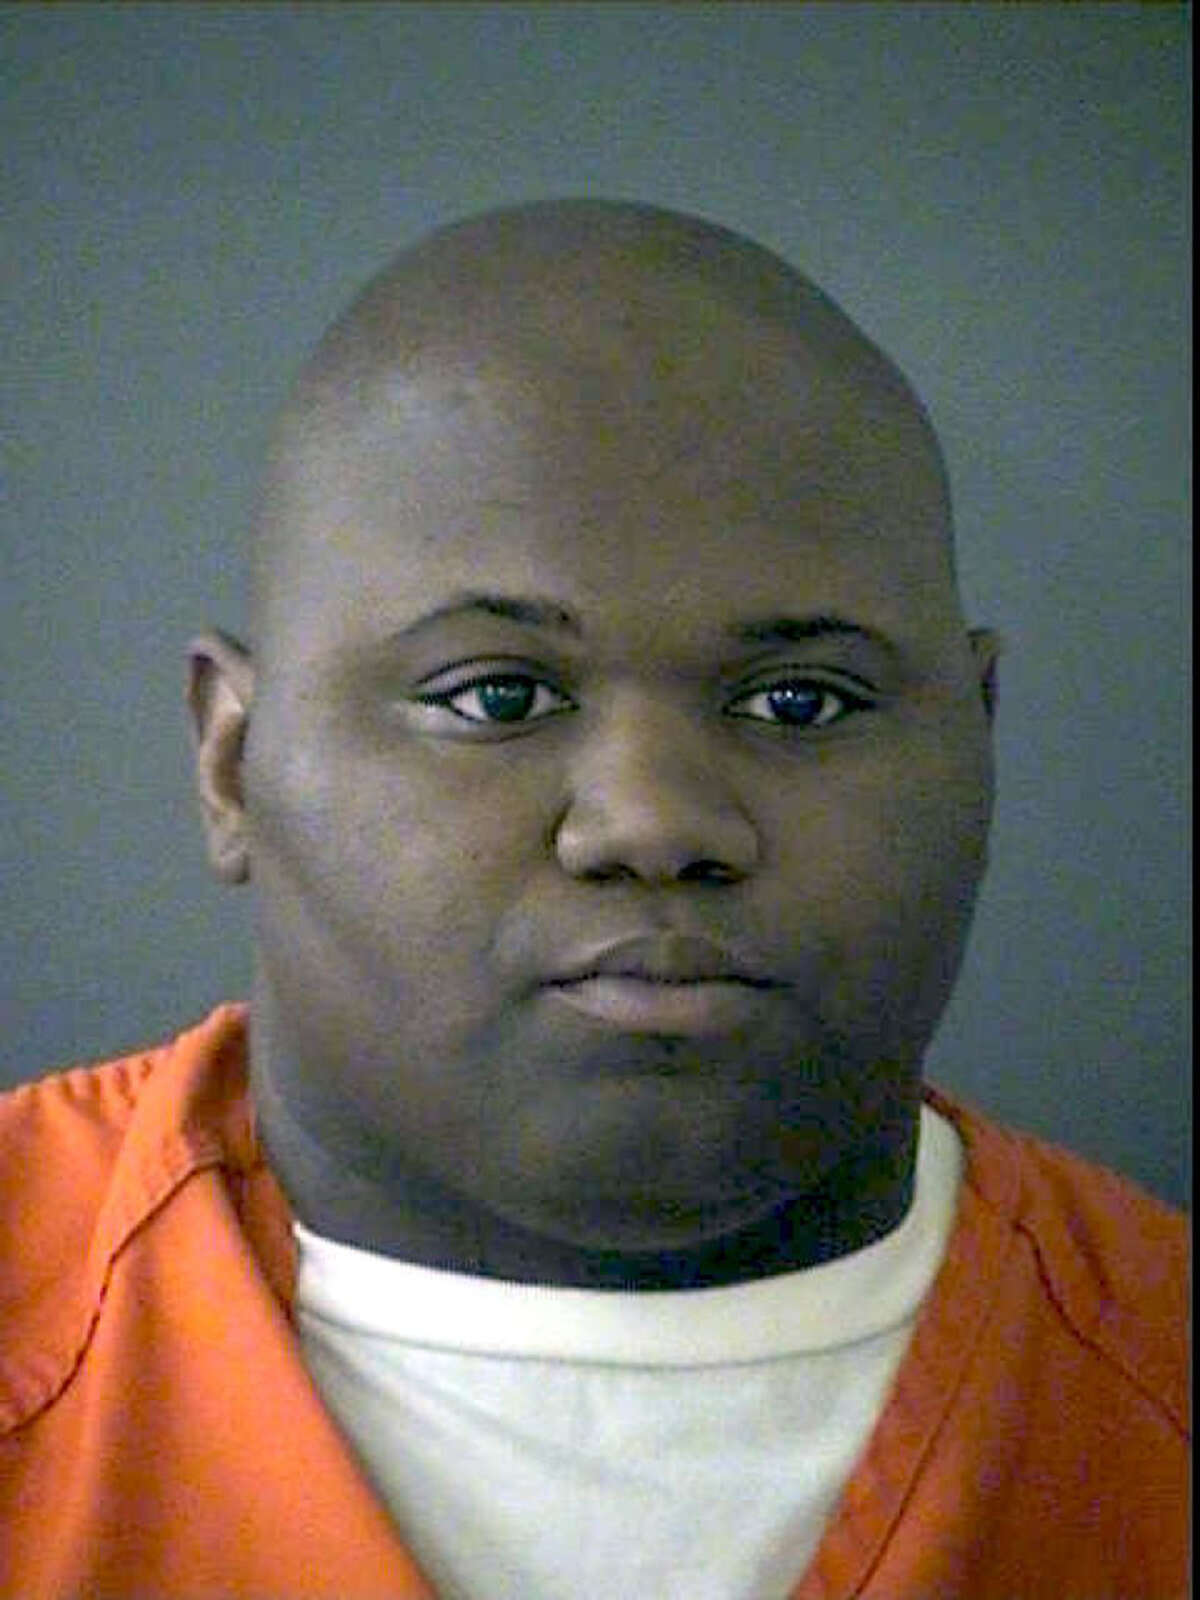 Norman Cooper, 33, died Sunday morning while in police custody.